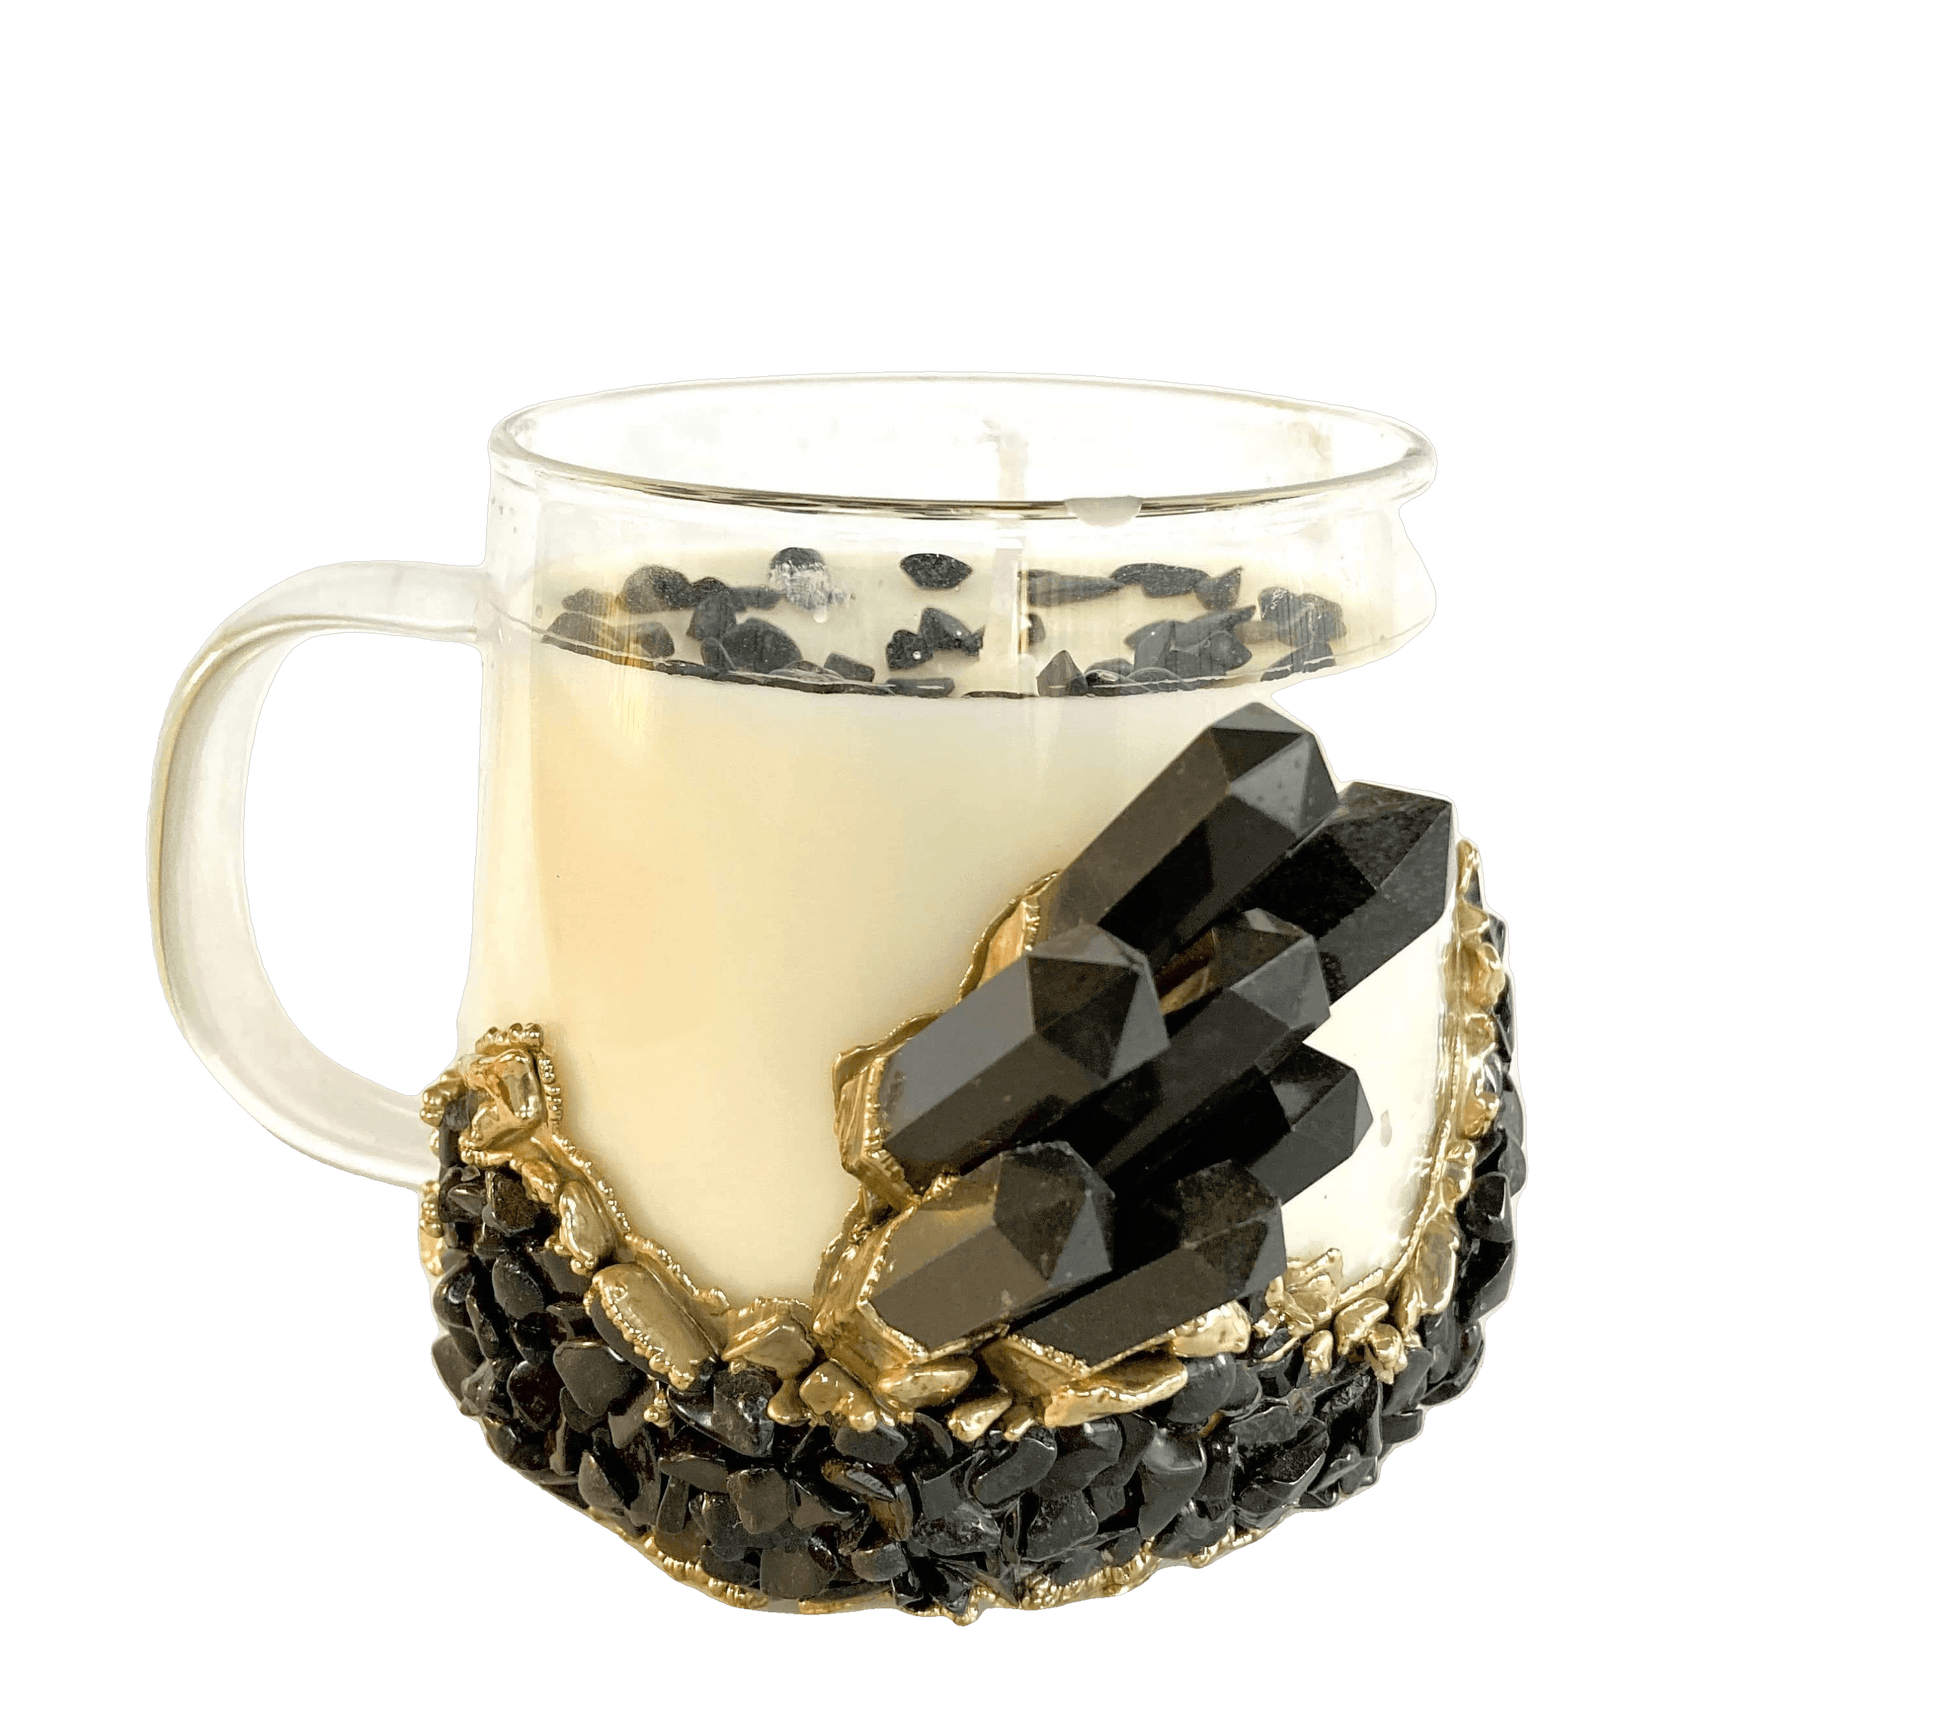 Black Agate Quartz Crystal Scented Soy Candles in Glass Mug - Set of 2 - MAIA HOMES